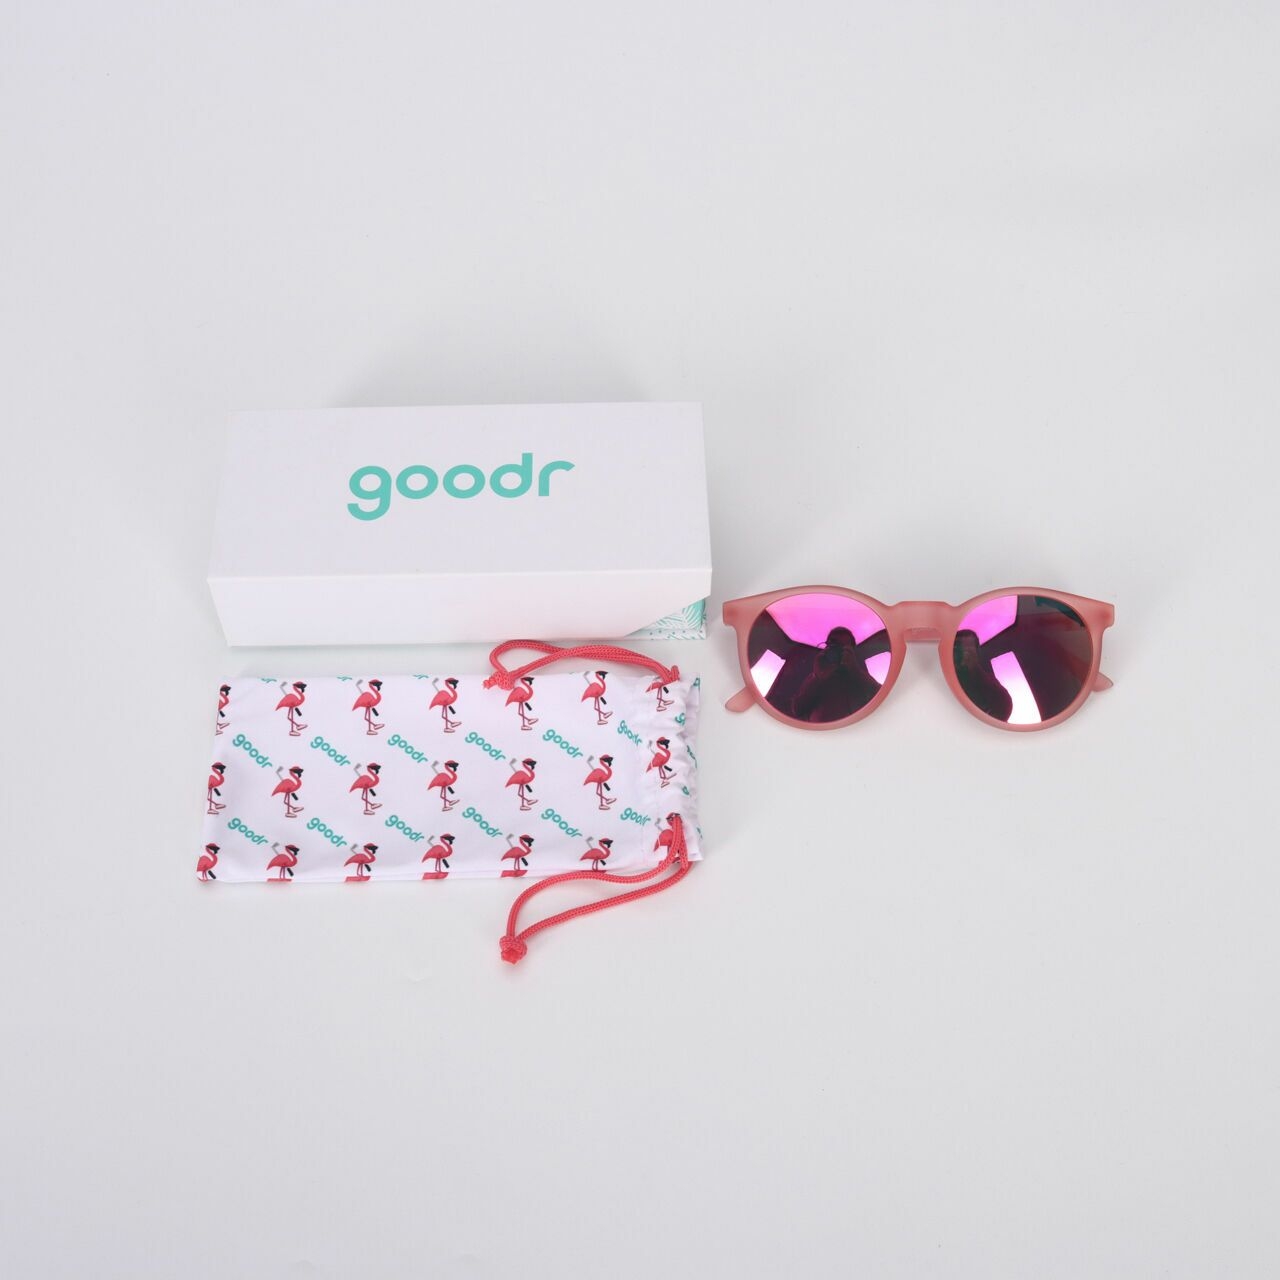 Goodr Influencers Pay Double Pink Sunglasses